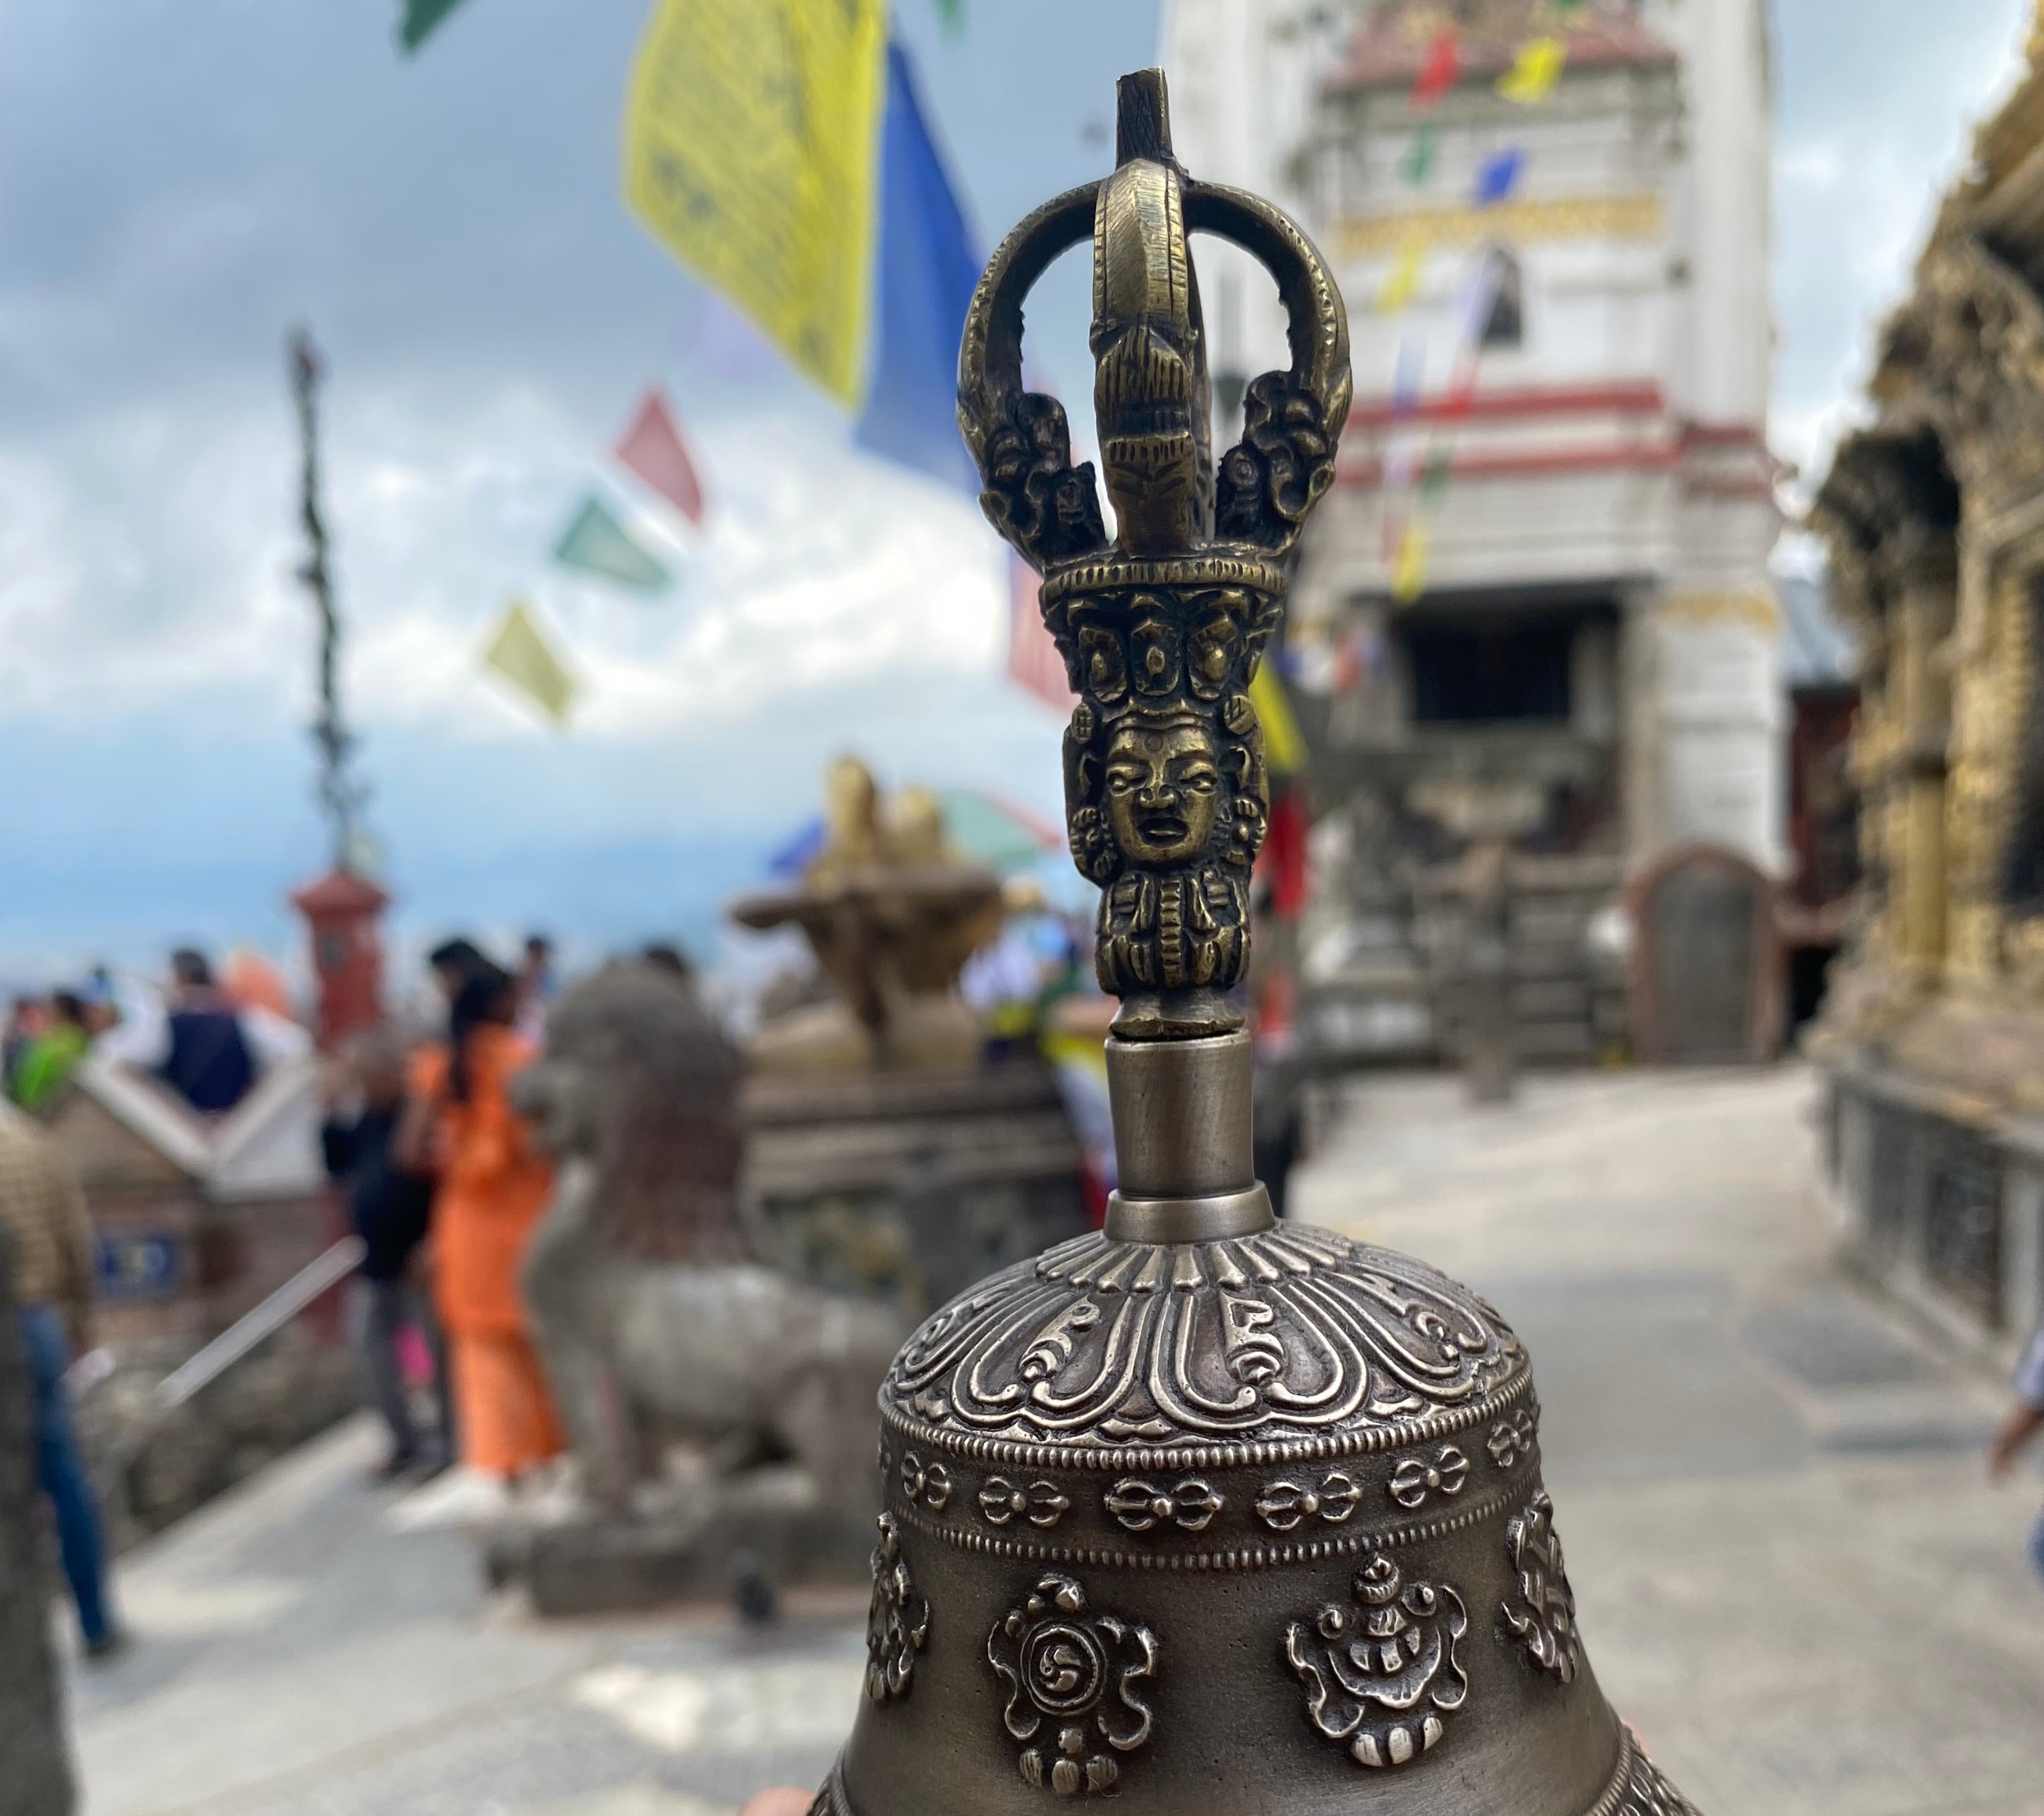 Eight auspicious bell for Buddhist ceremonies, such as pujas and meditations.